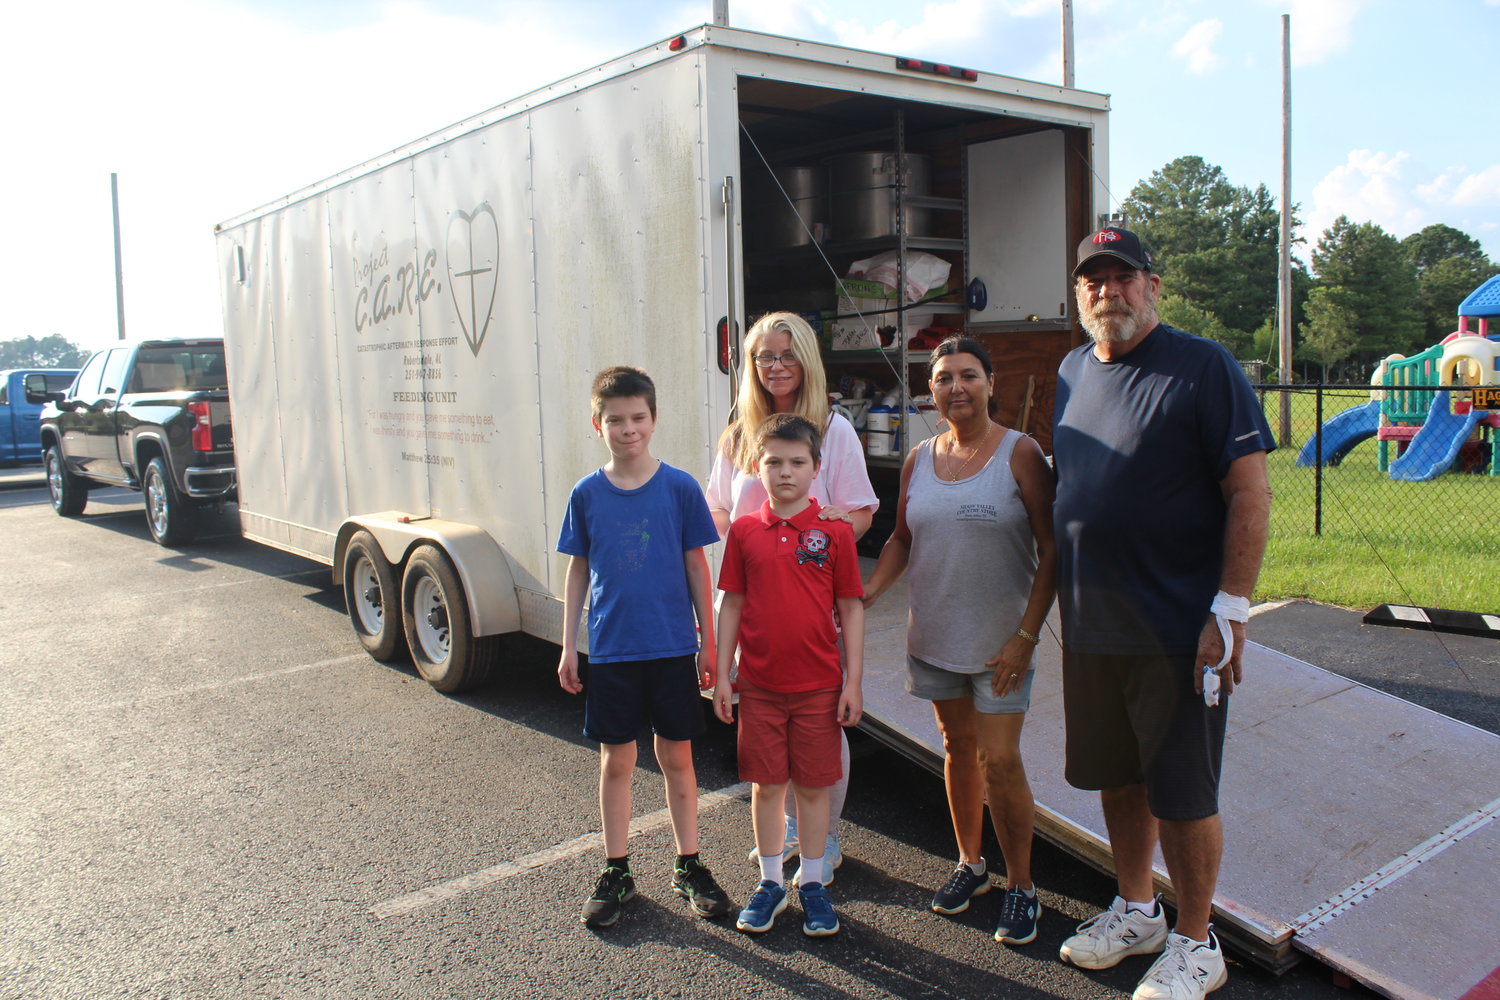 Volunteers with the First Baptist Church of Robertsdale prepare trailers Thursday, Sept. 2 ready to provide relief for Louisiana residents impacted by Hurricane Ida.